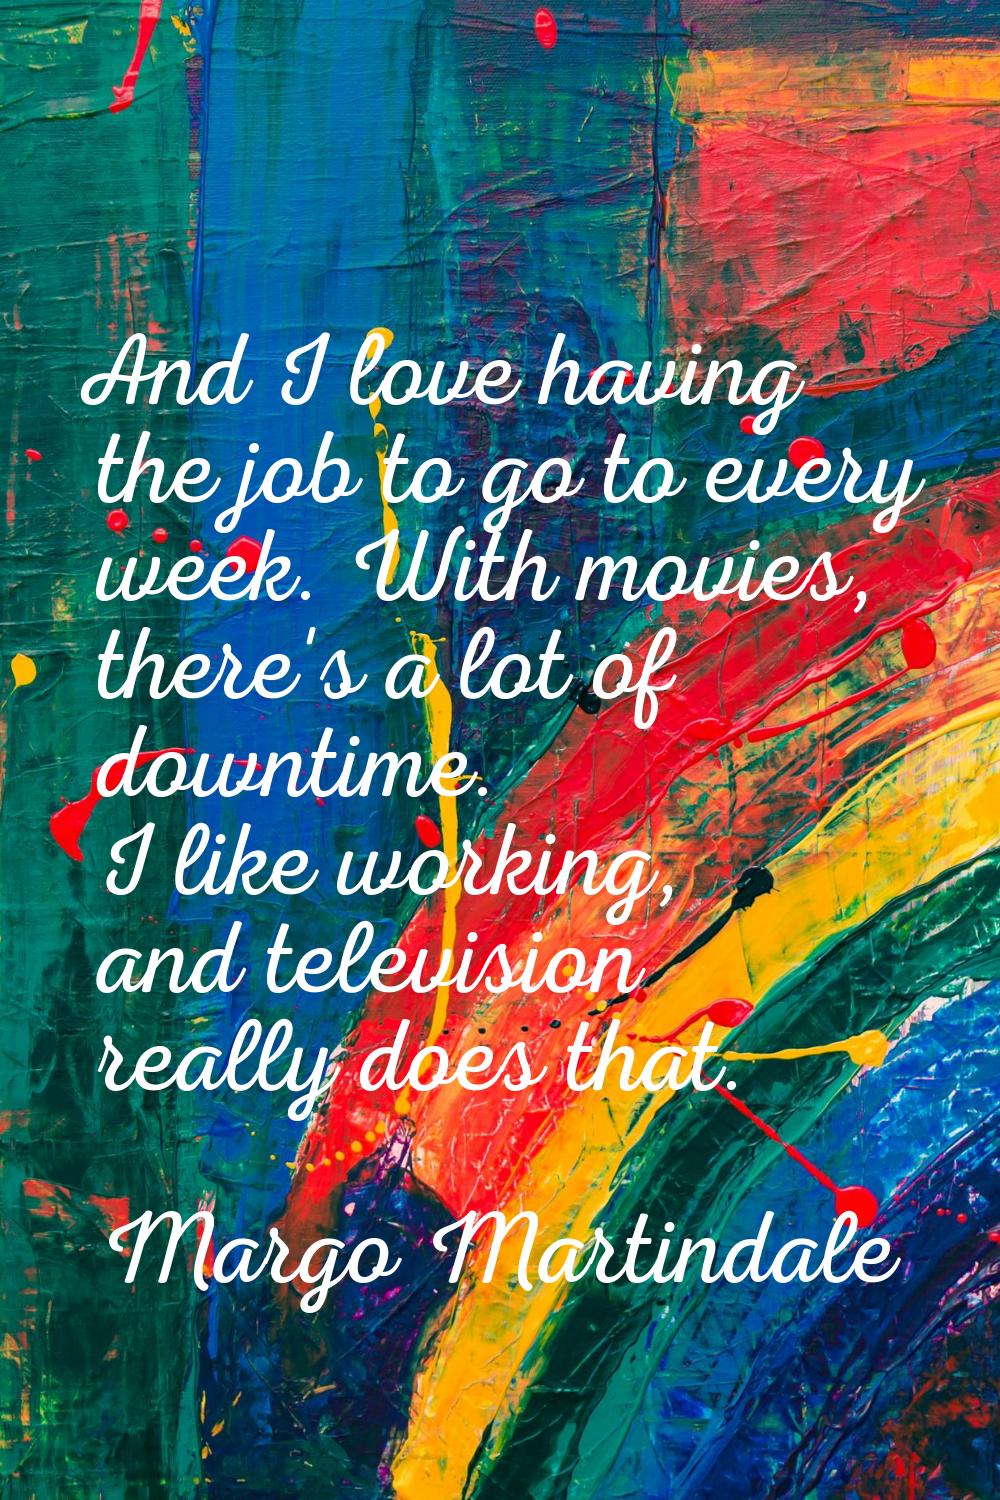 And I love having the job to go to every week. With movies, there's a lot of downtime. I like worki